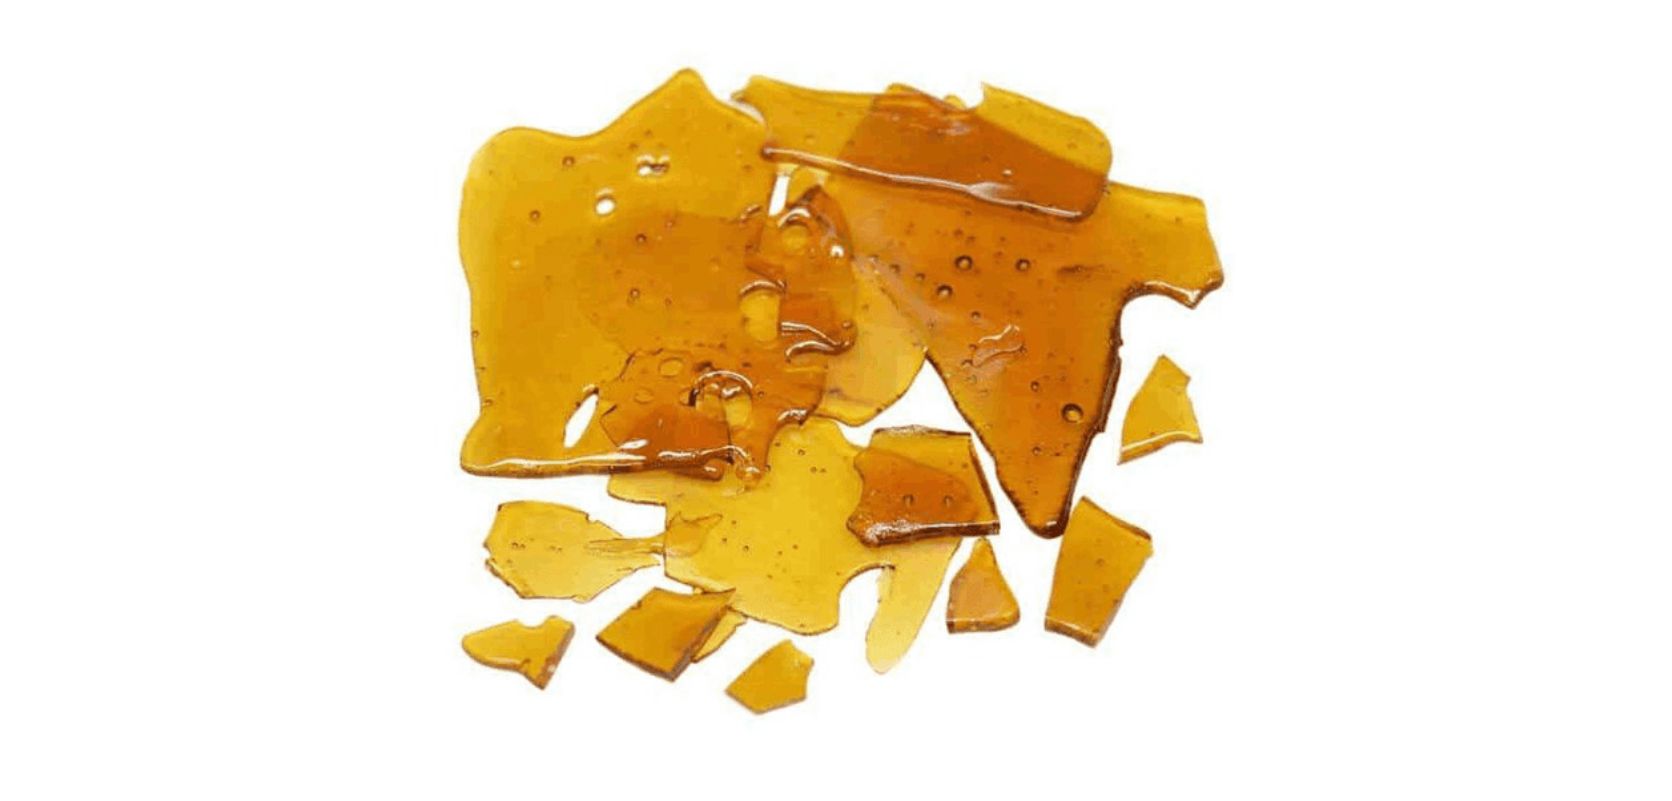 Ordering your shatter online in Canada is a bit like ordering takeout - you get the goods delivered right to your doorstep, and you don't even have to change out of your pyjamas